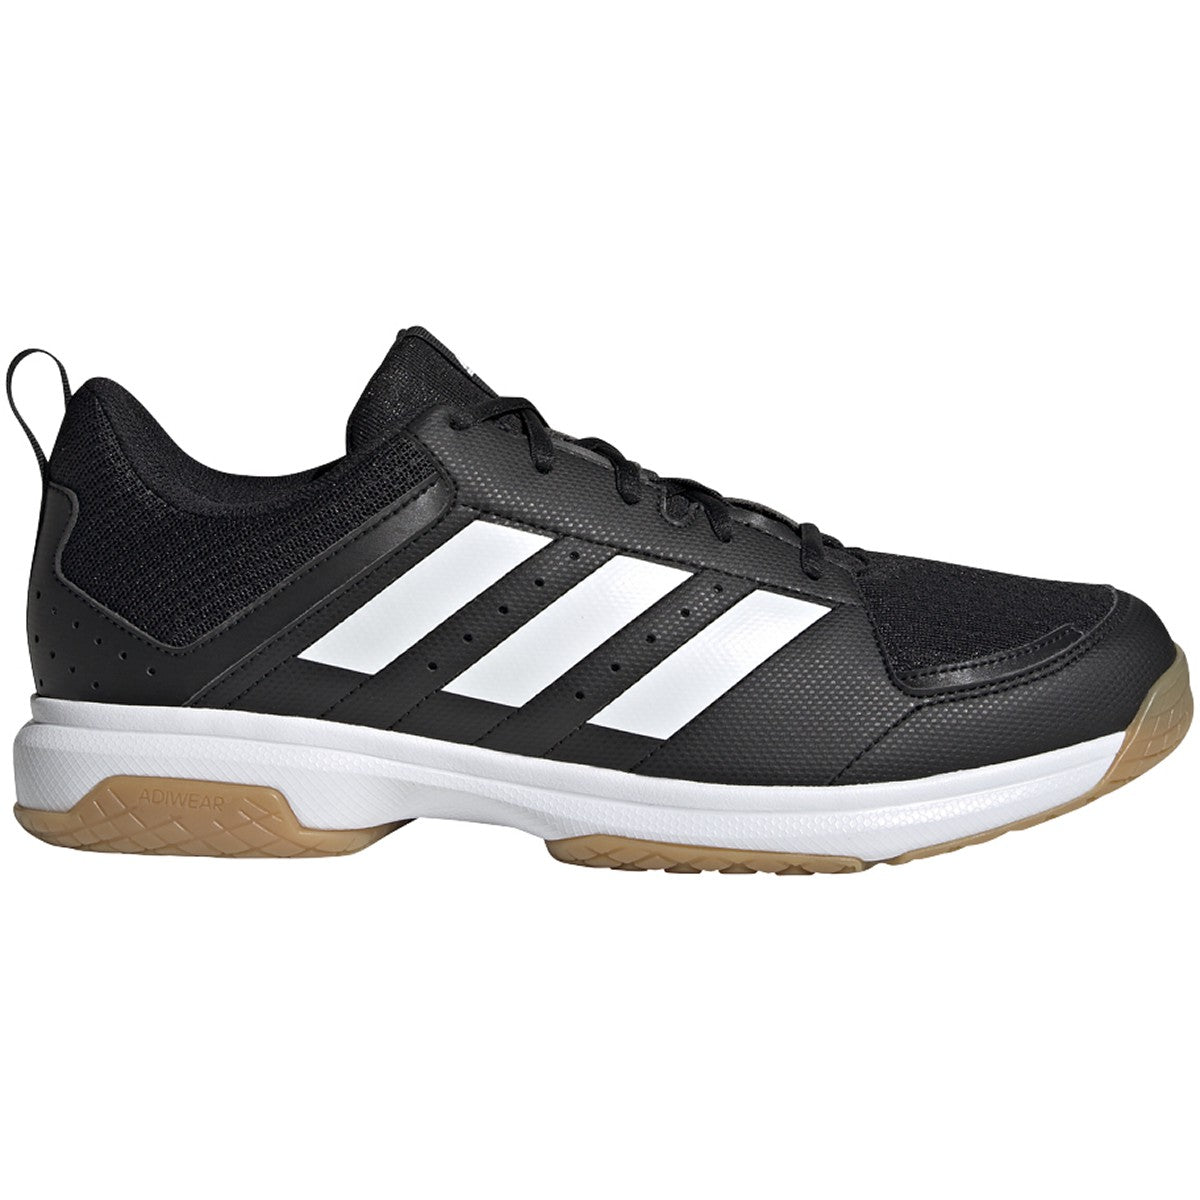 Mens Outfitters 7 Shoes Ligra – Indoor adidas League